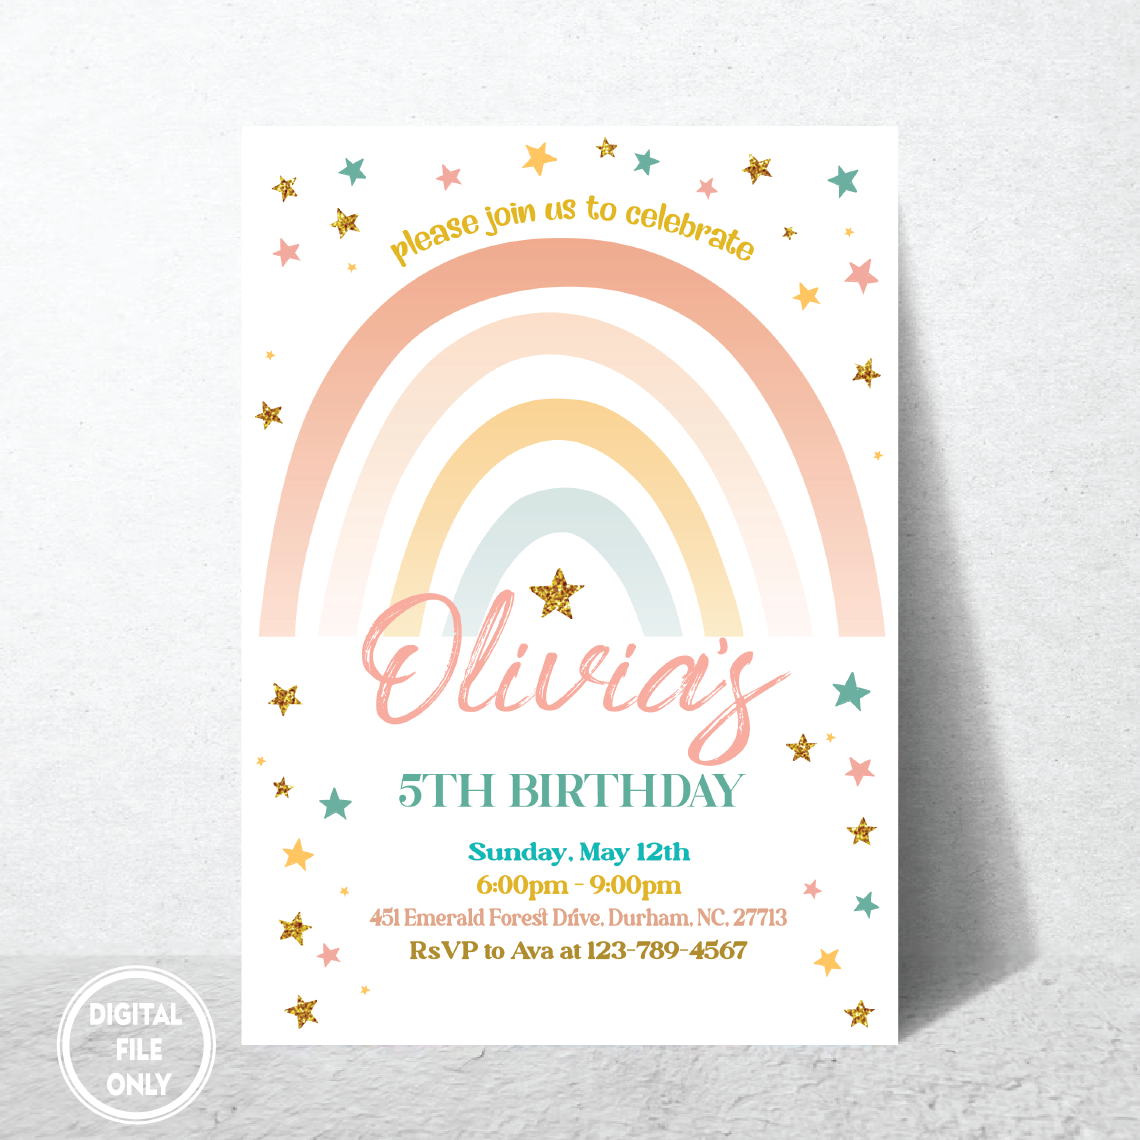 Personalized File Rainbow Birthday Invitation for Girls, Gold Stars Modern, Fun Girls Birthday Invitation ,Printable Download PNG File Only